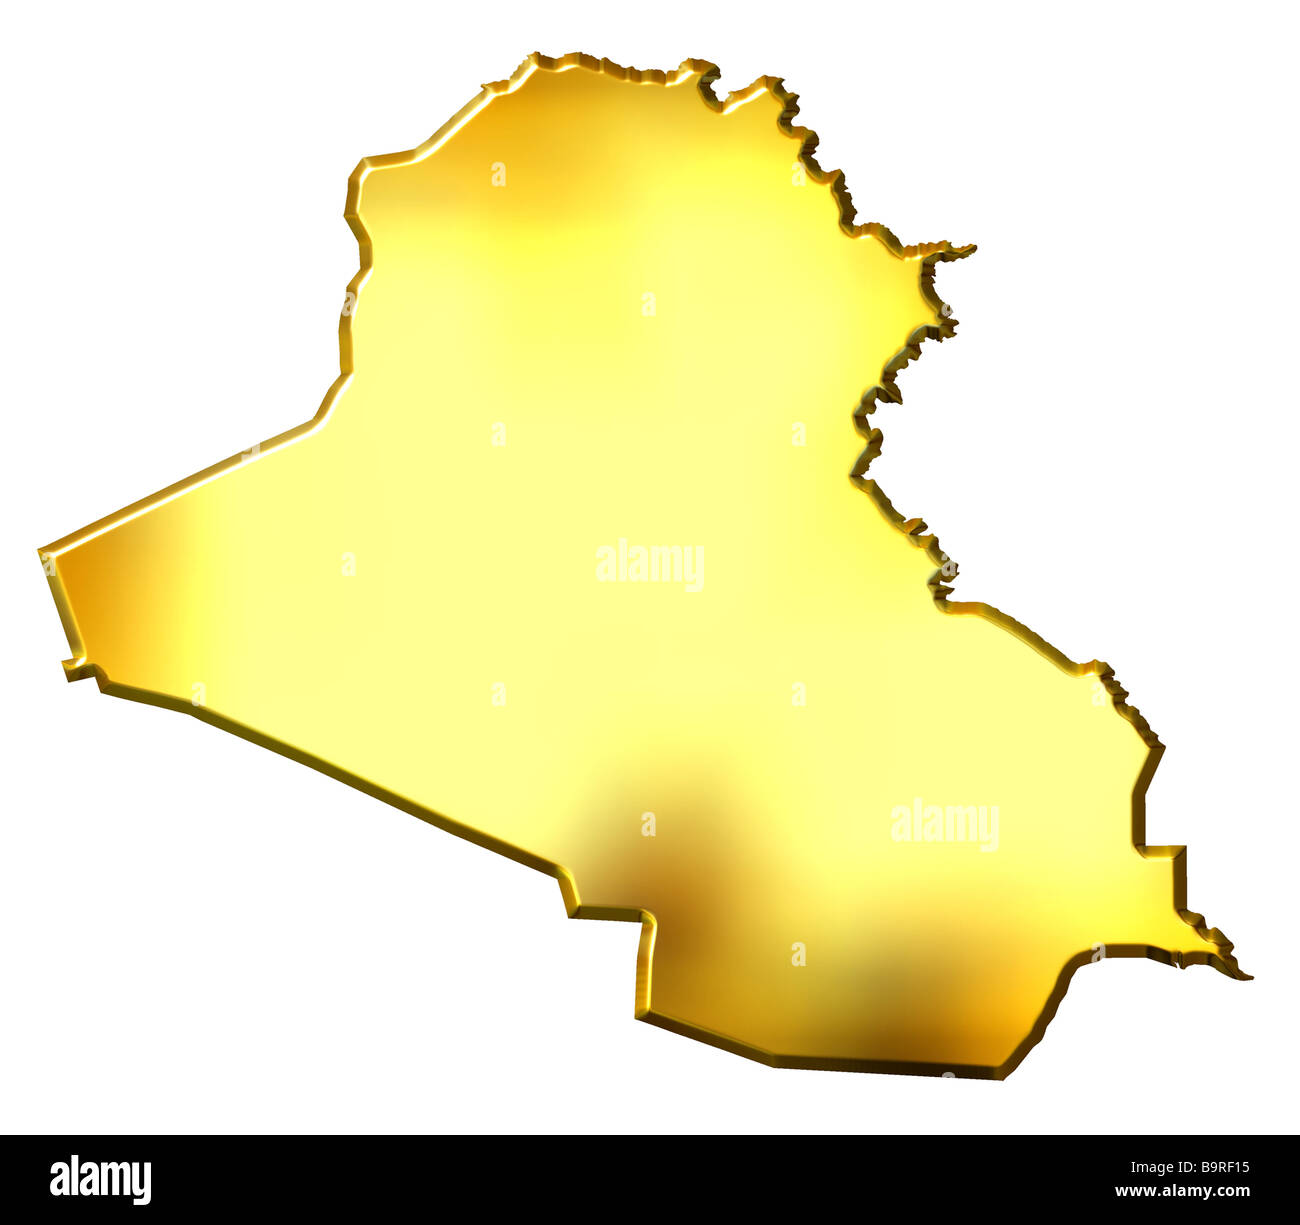 Iraq 3d golden map isolated in white Stock Photo